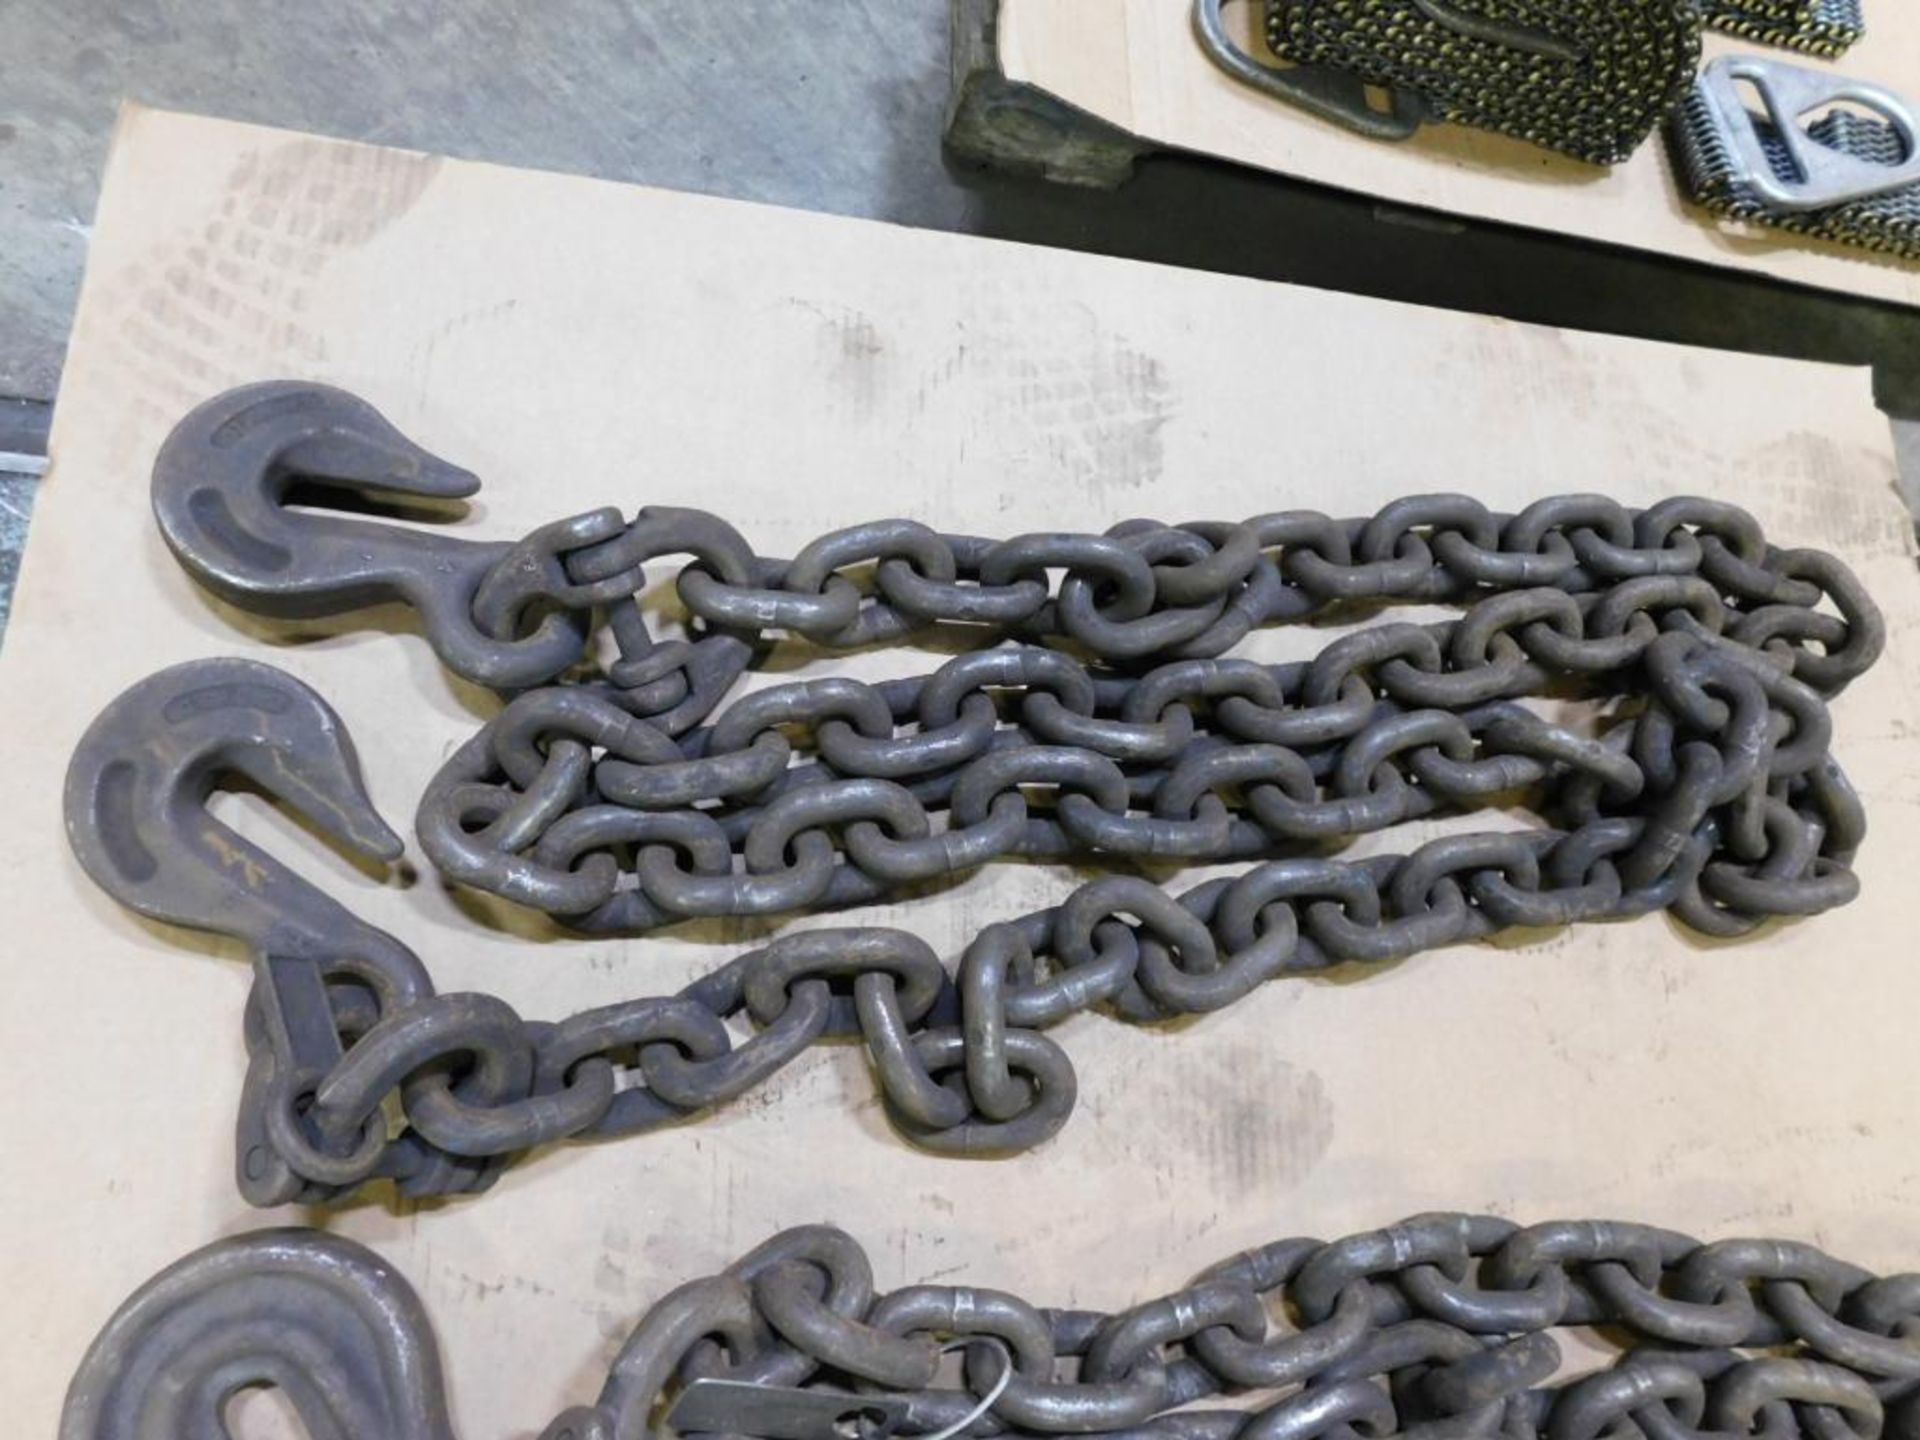 LOT: (1) 28,300 Lb. Double Hook Lifting Chain, 27' Length, Size 3/4", (1) 28,300 Lb. Double Hook Lif - Image 5 of 8